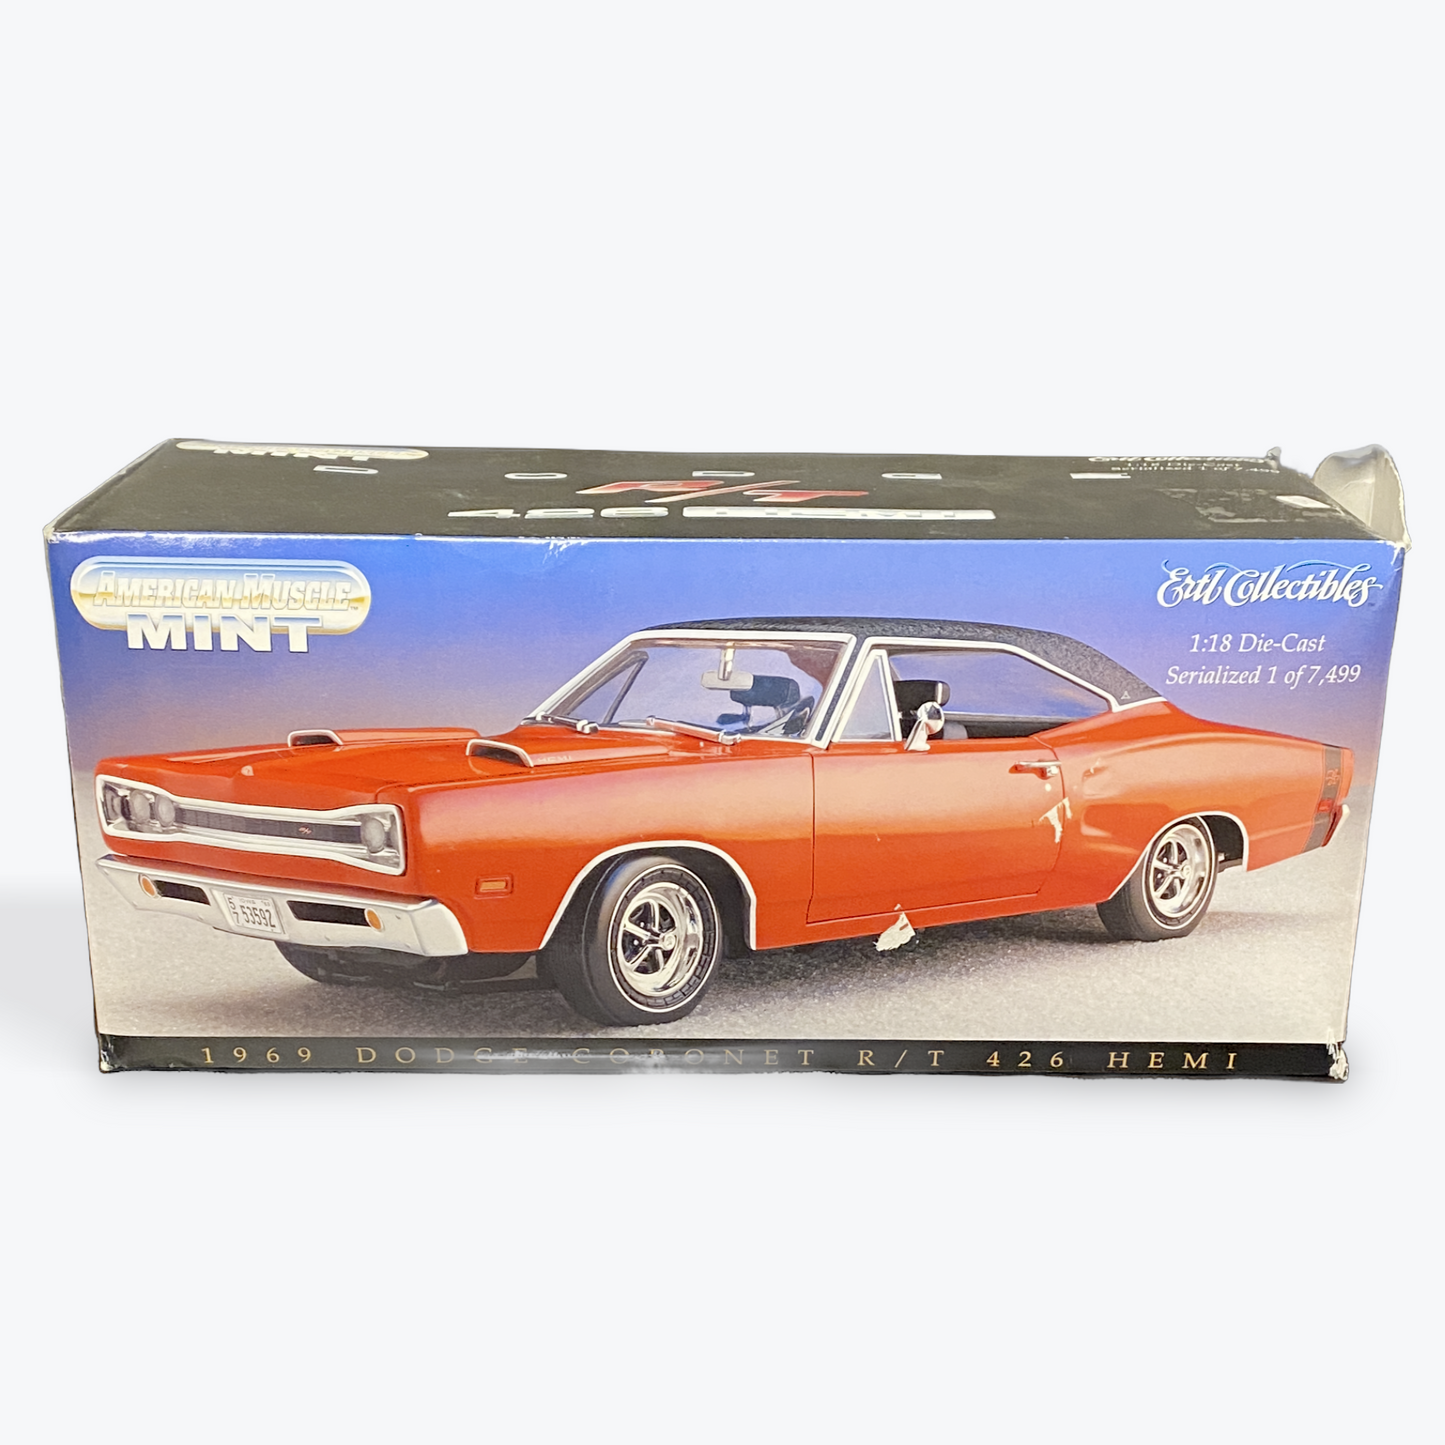 1/18 Scale American Muscle 1969 Dodge Coronet R/T - Mint Series/Hemi/Black Vinyl Top - Performance Red - Ertl Collectibles